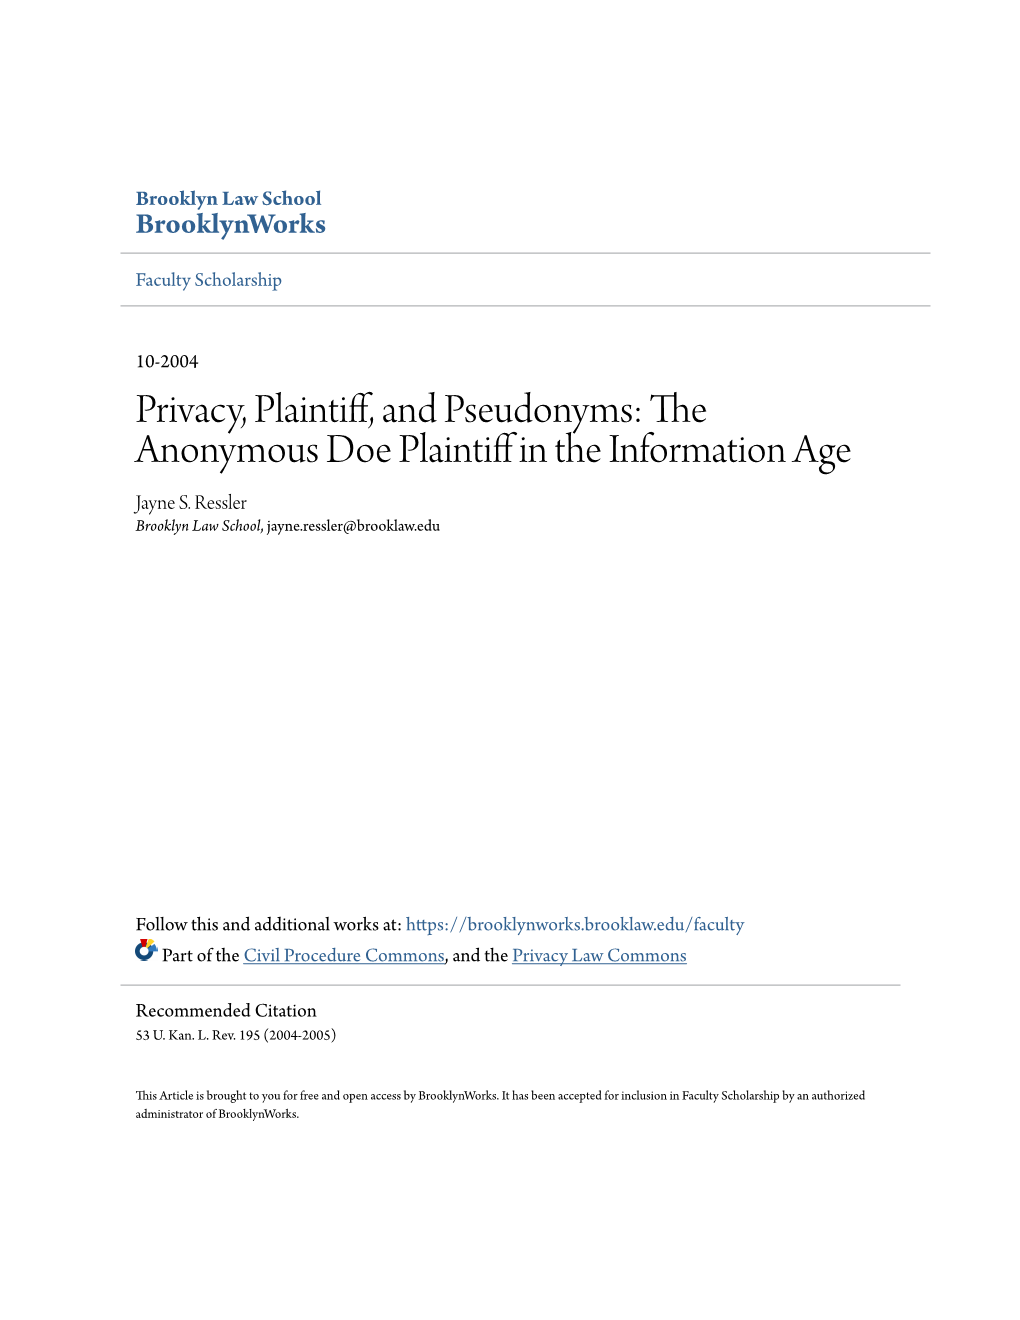 Privacy, Plaintiff, and Pseudonyms: the Anonymous Doe Plaintiff in the Information